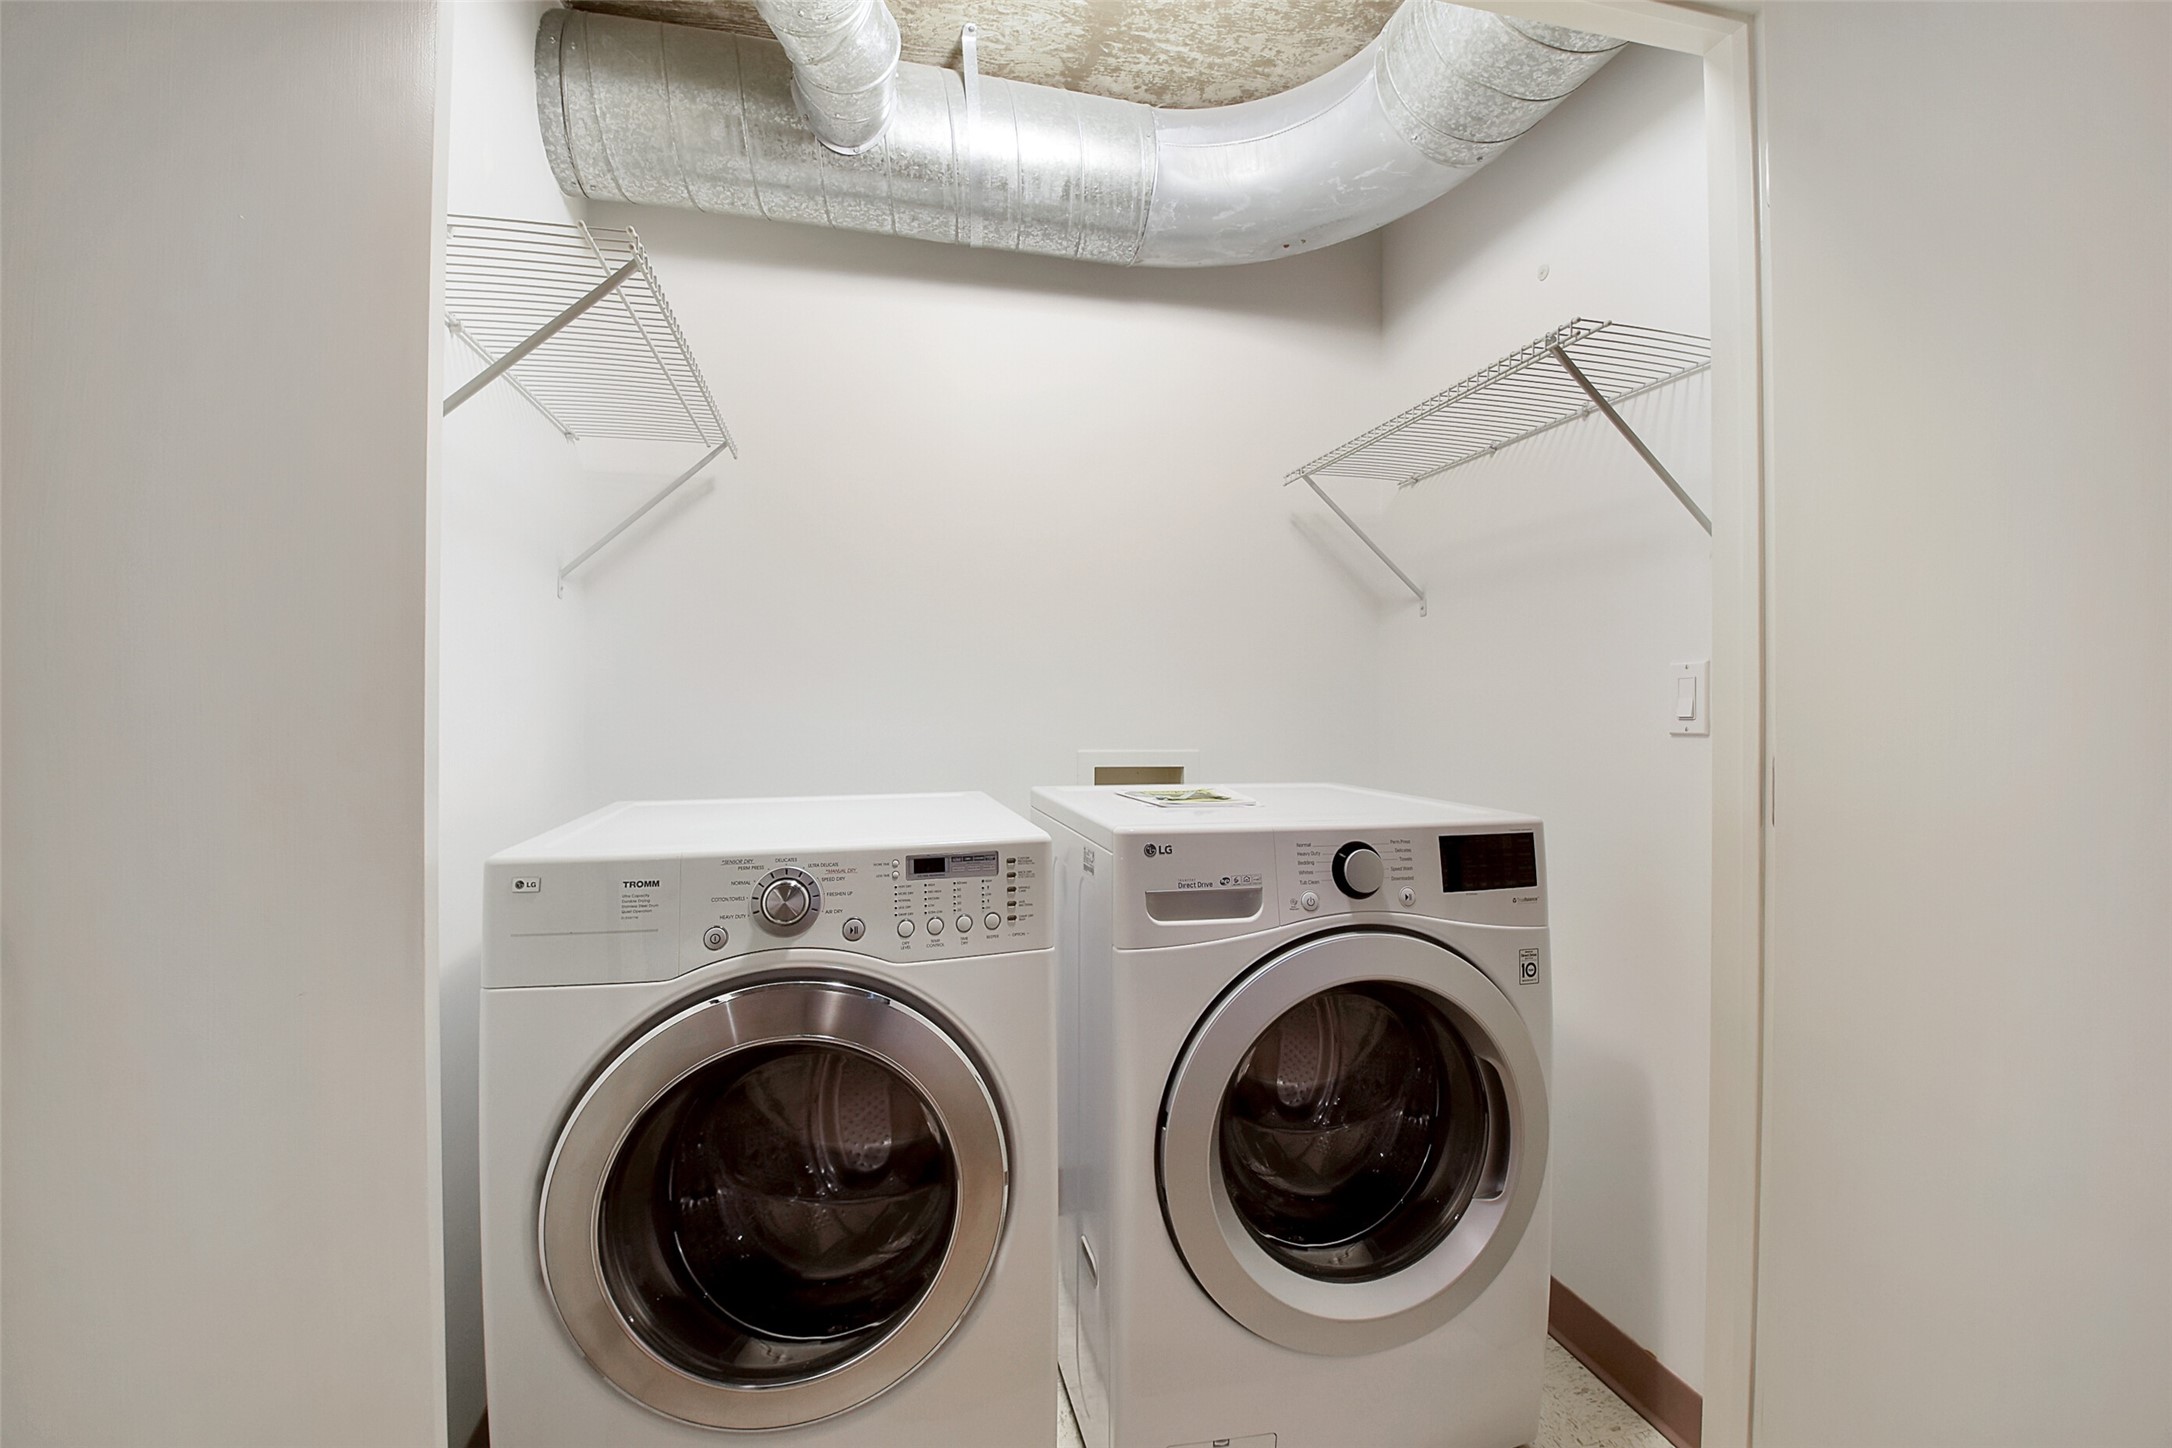 THE  UTILITY ROOM IS LOCATED ON THE SECOND FLOOR WITH USEFUL STORAGE SHELVES. BONUS THE WASHER AND DRYER ARE INCLUDED!